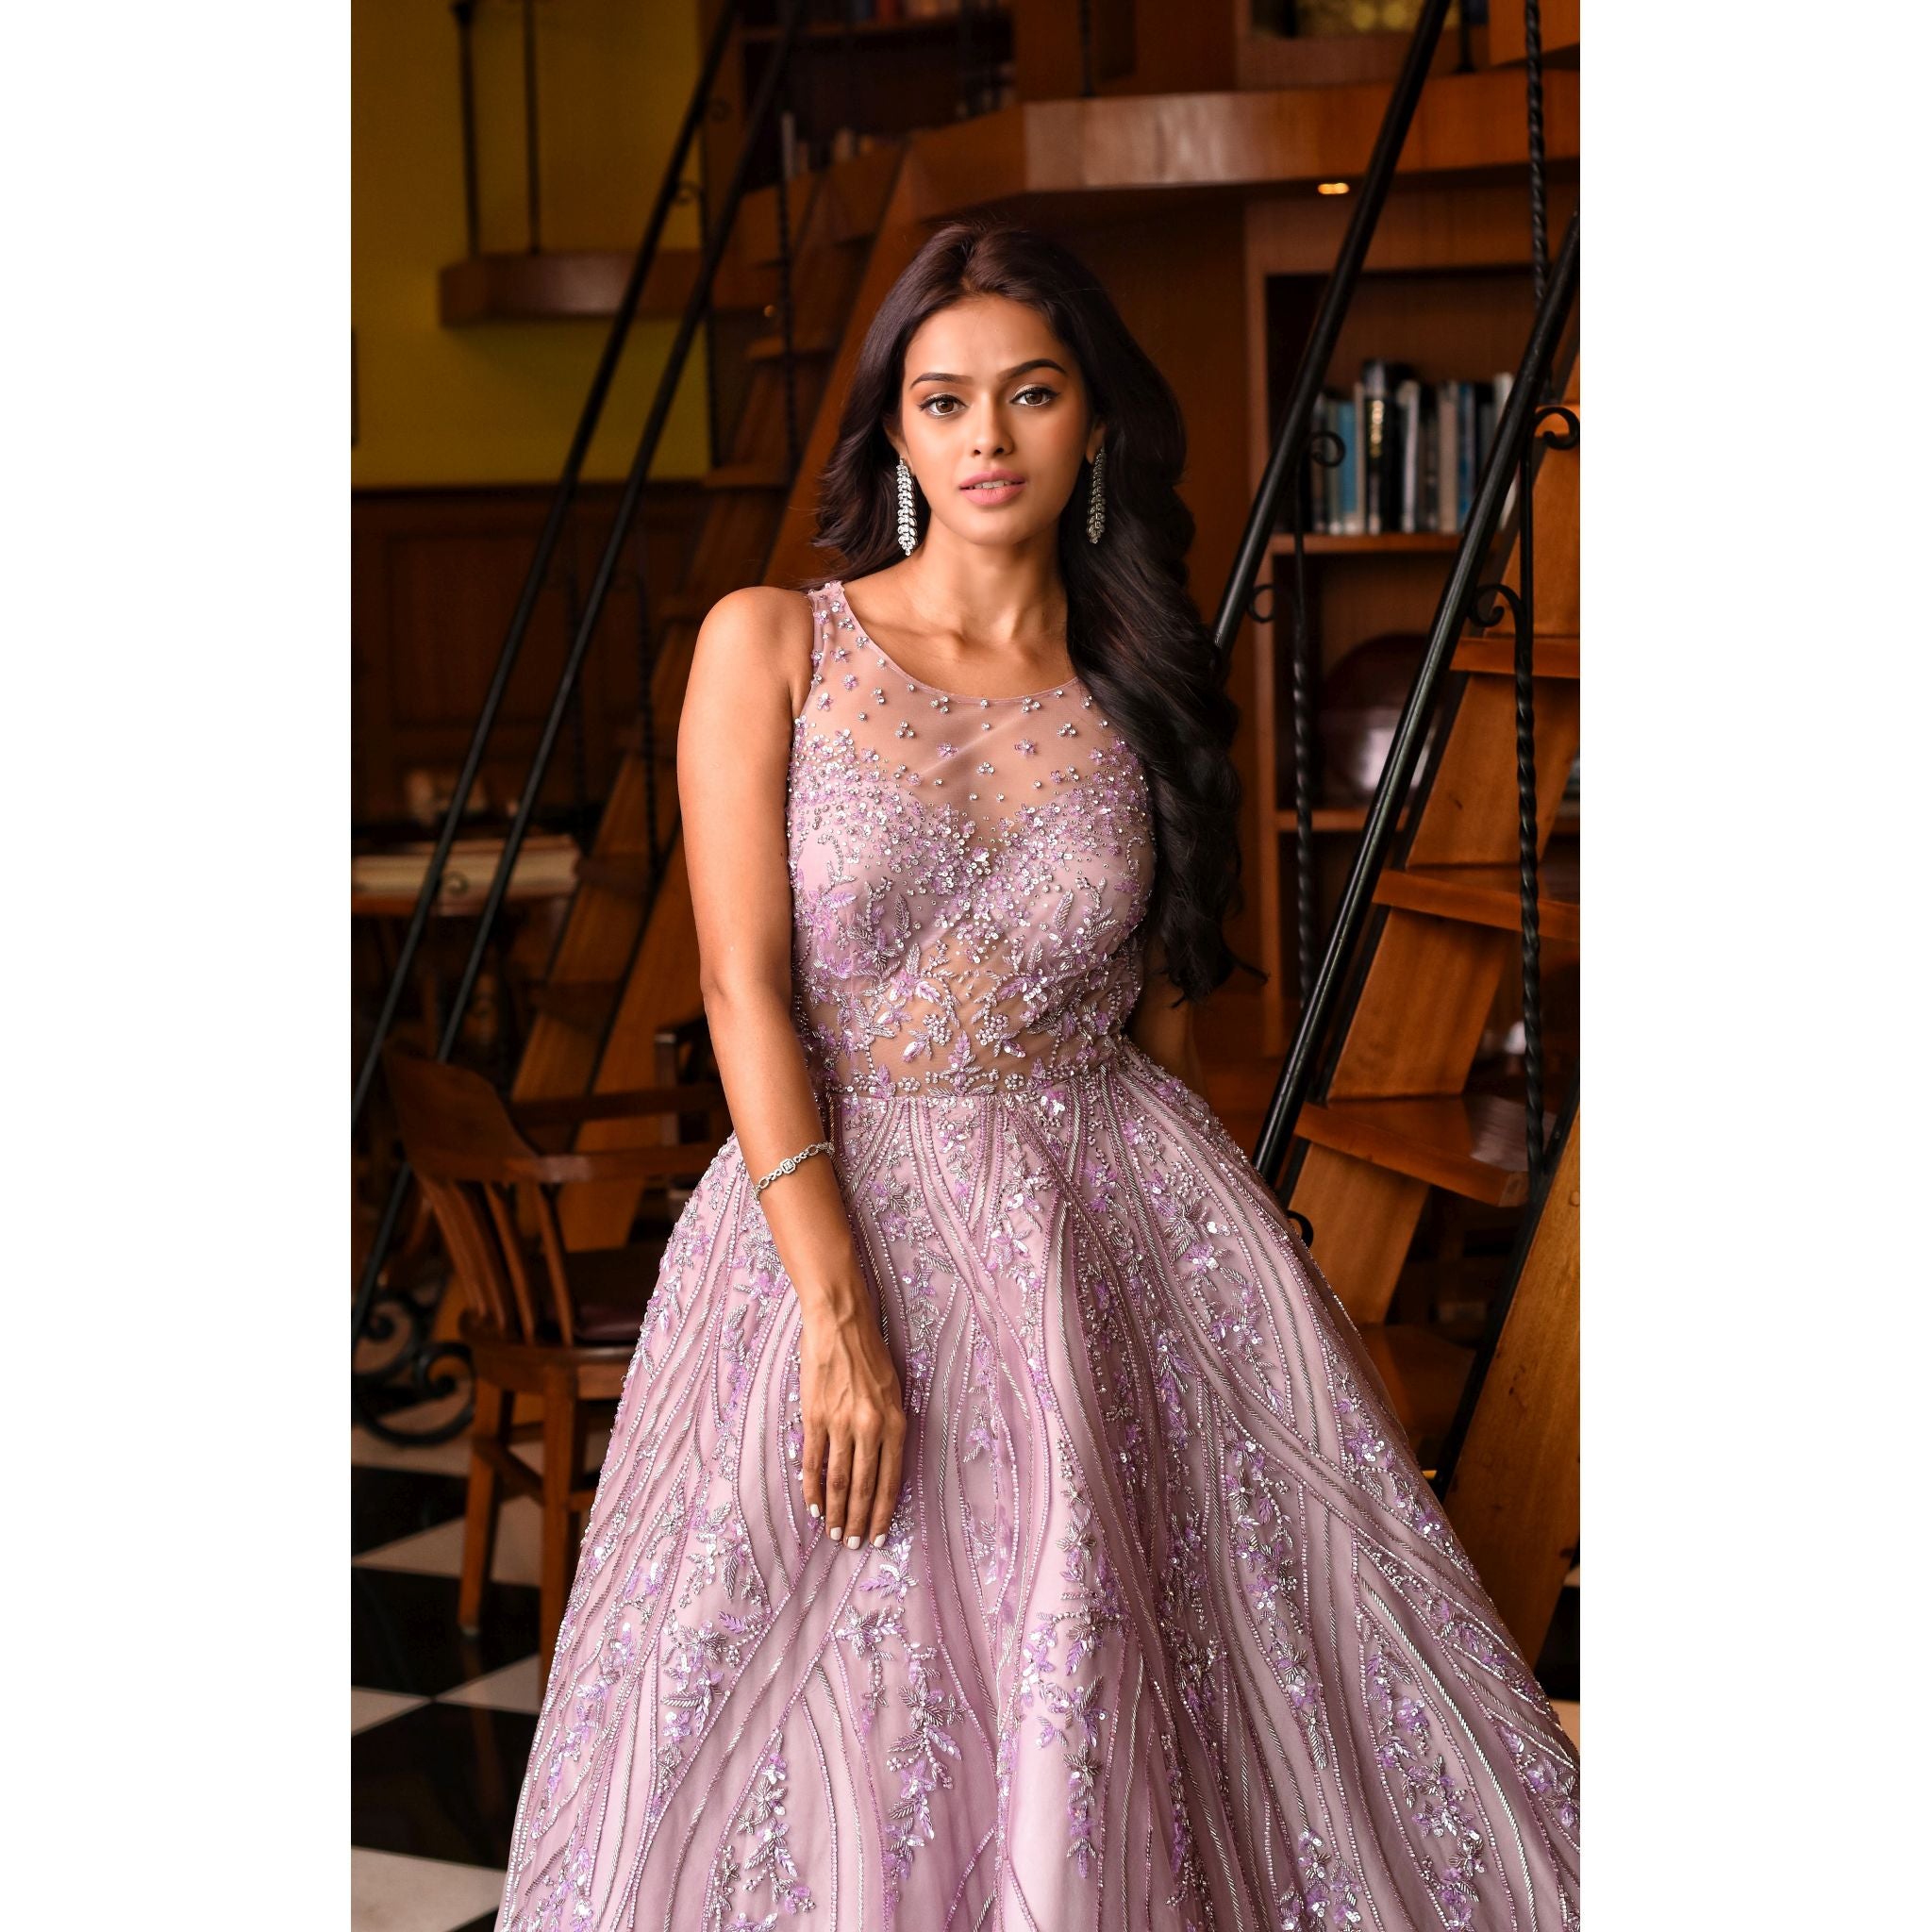 Lilac Gown - Indian Designer Bridal Wedding Outfit